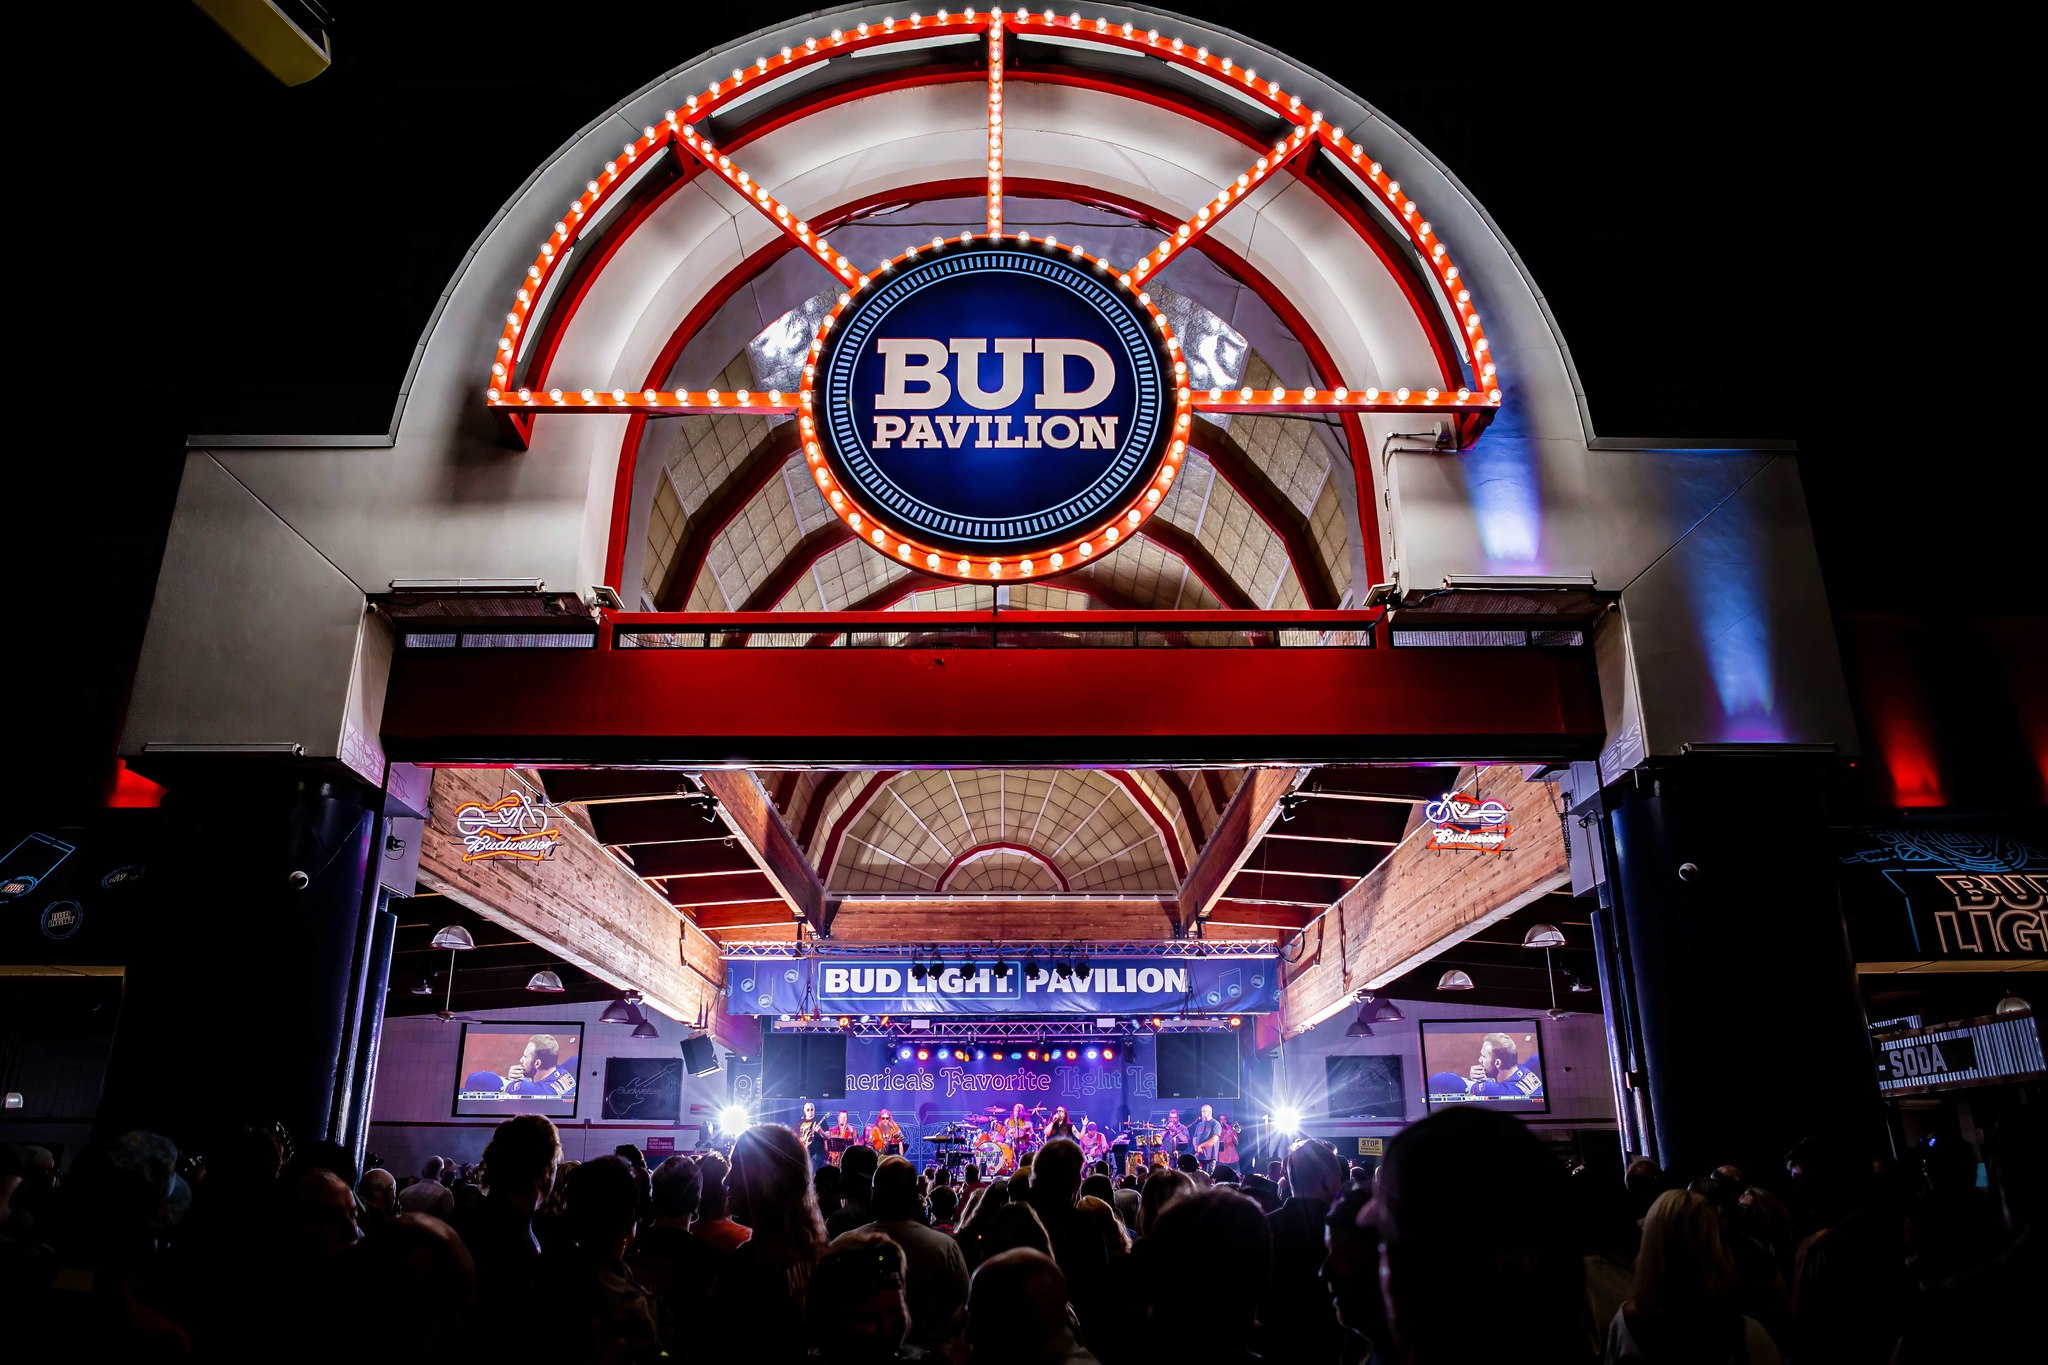 bud pavilion at wisconsin state fair